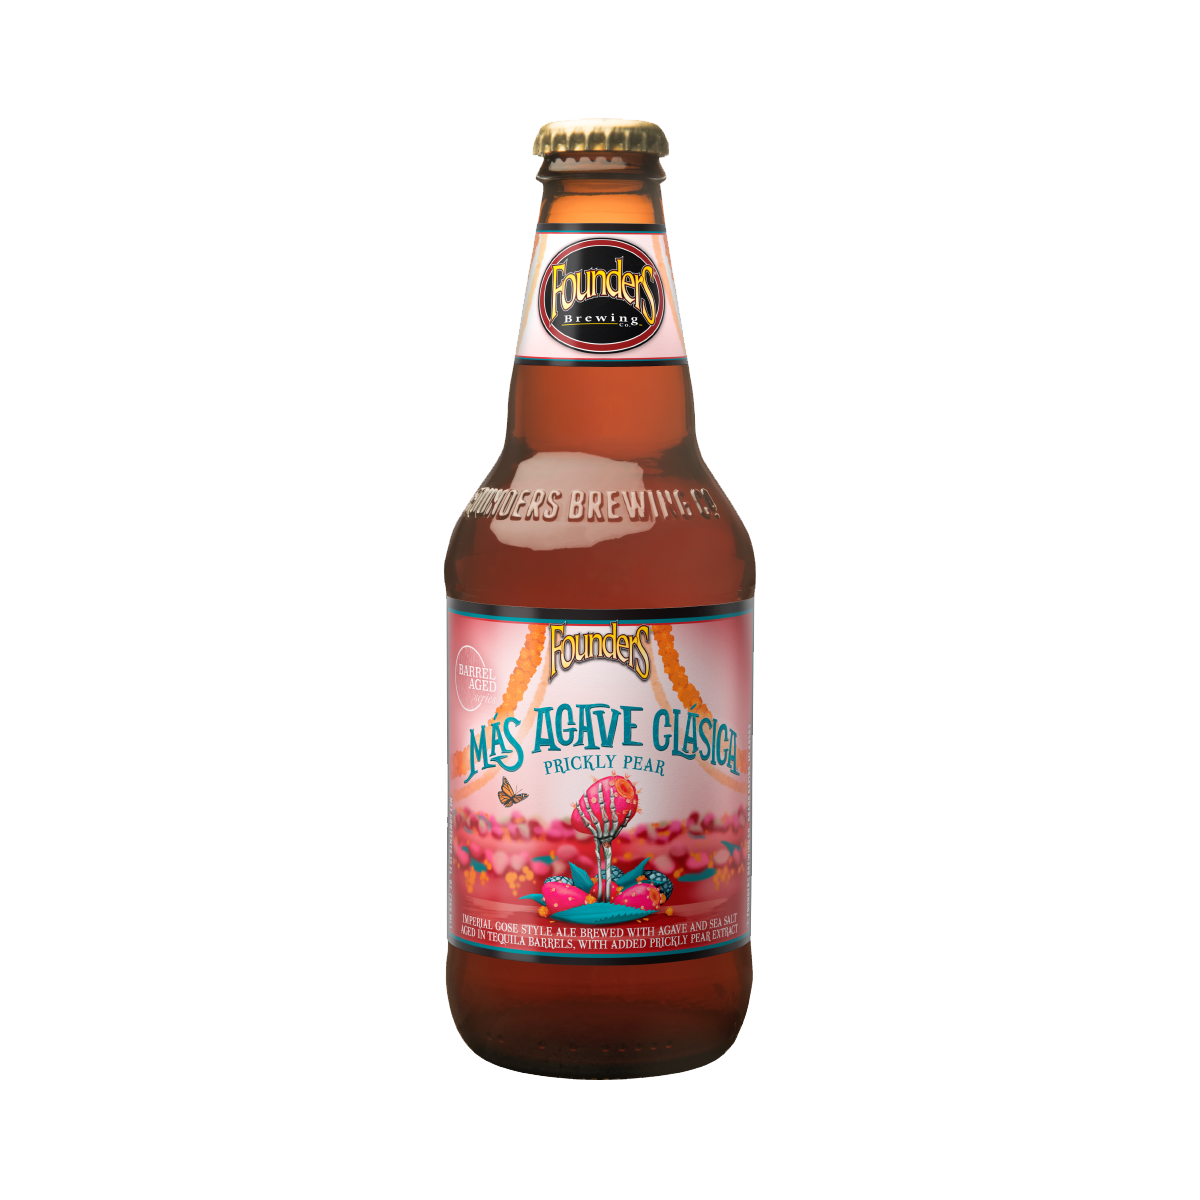 Mas Agave Clasica Prickly Pear